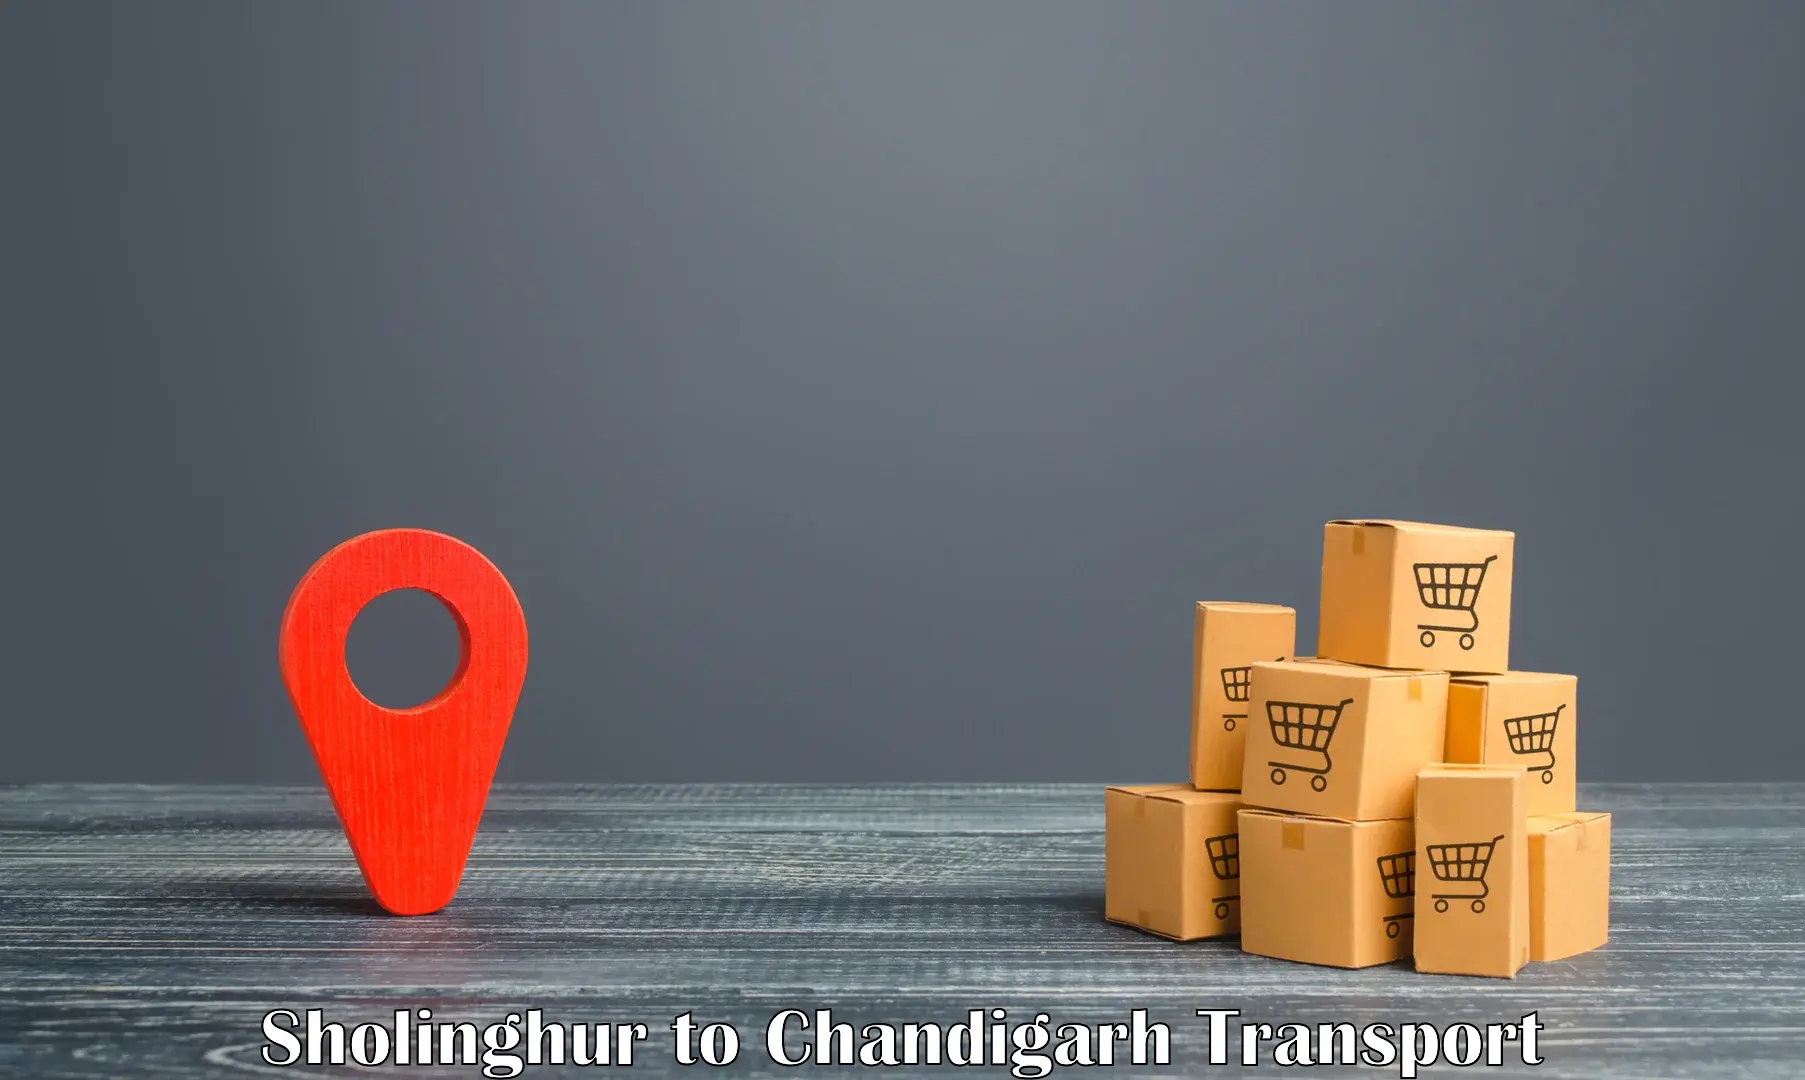 Cycle transportation service Sholinghur to Chandigarh